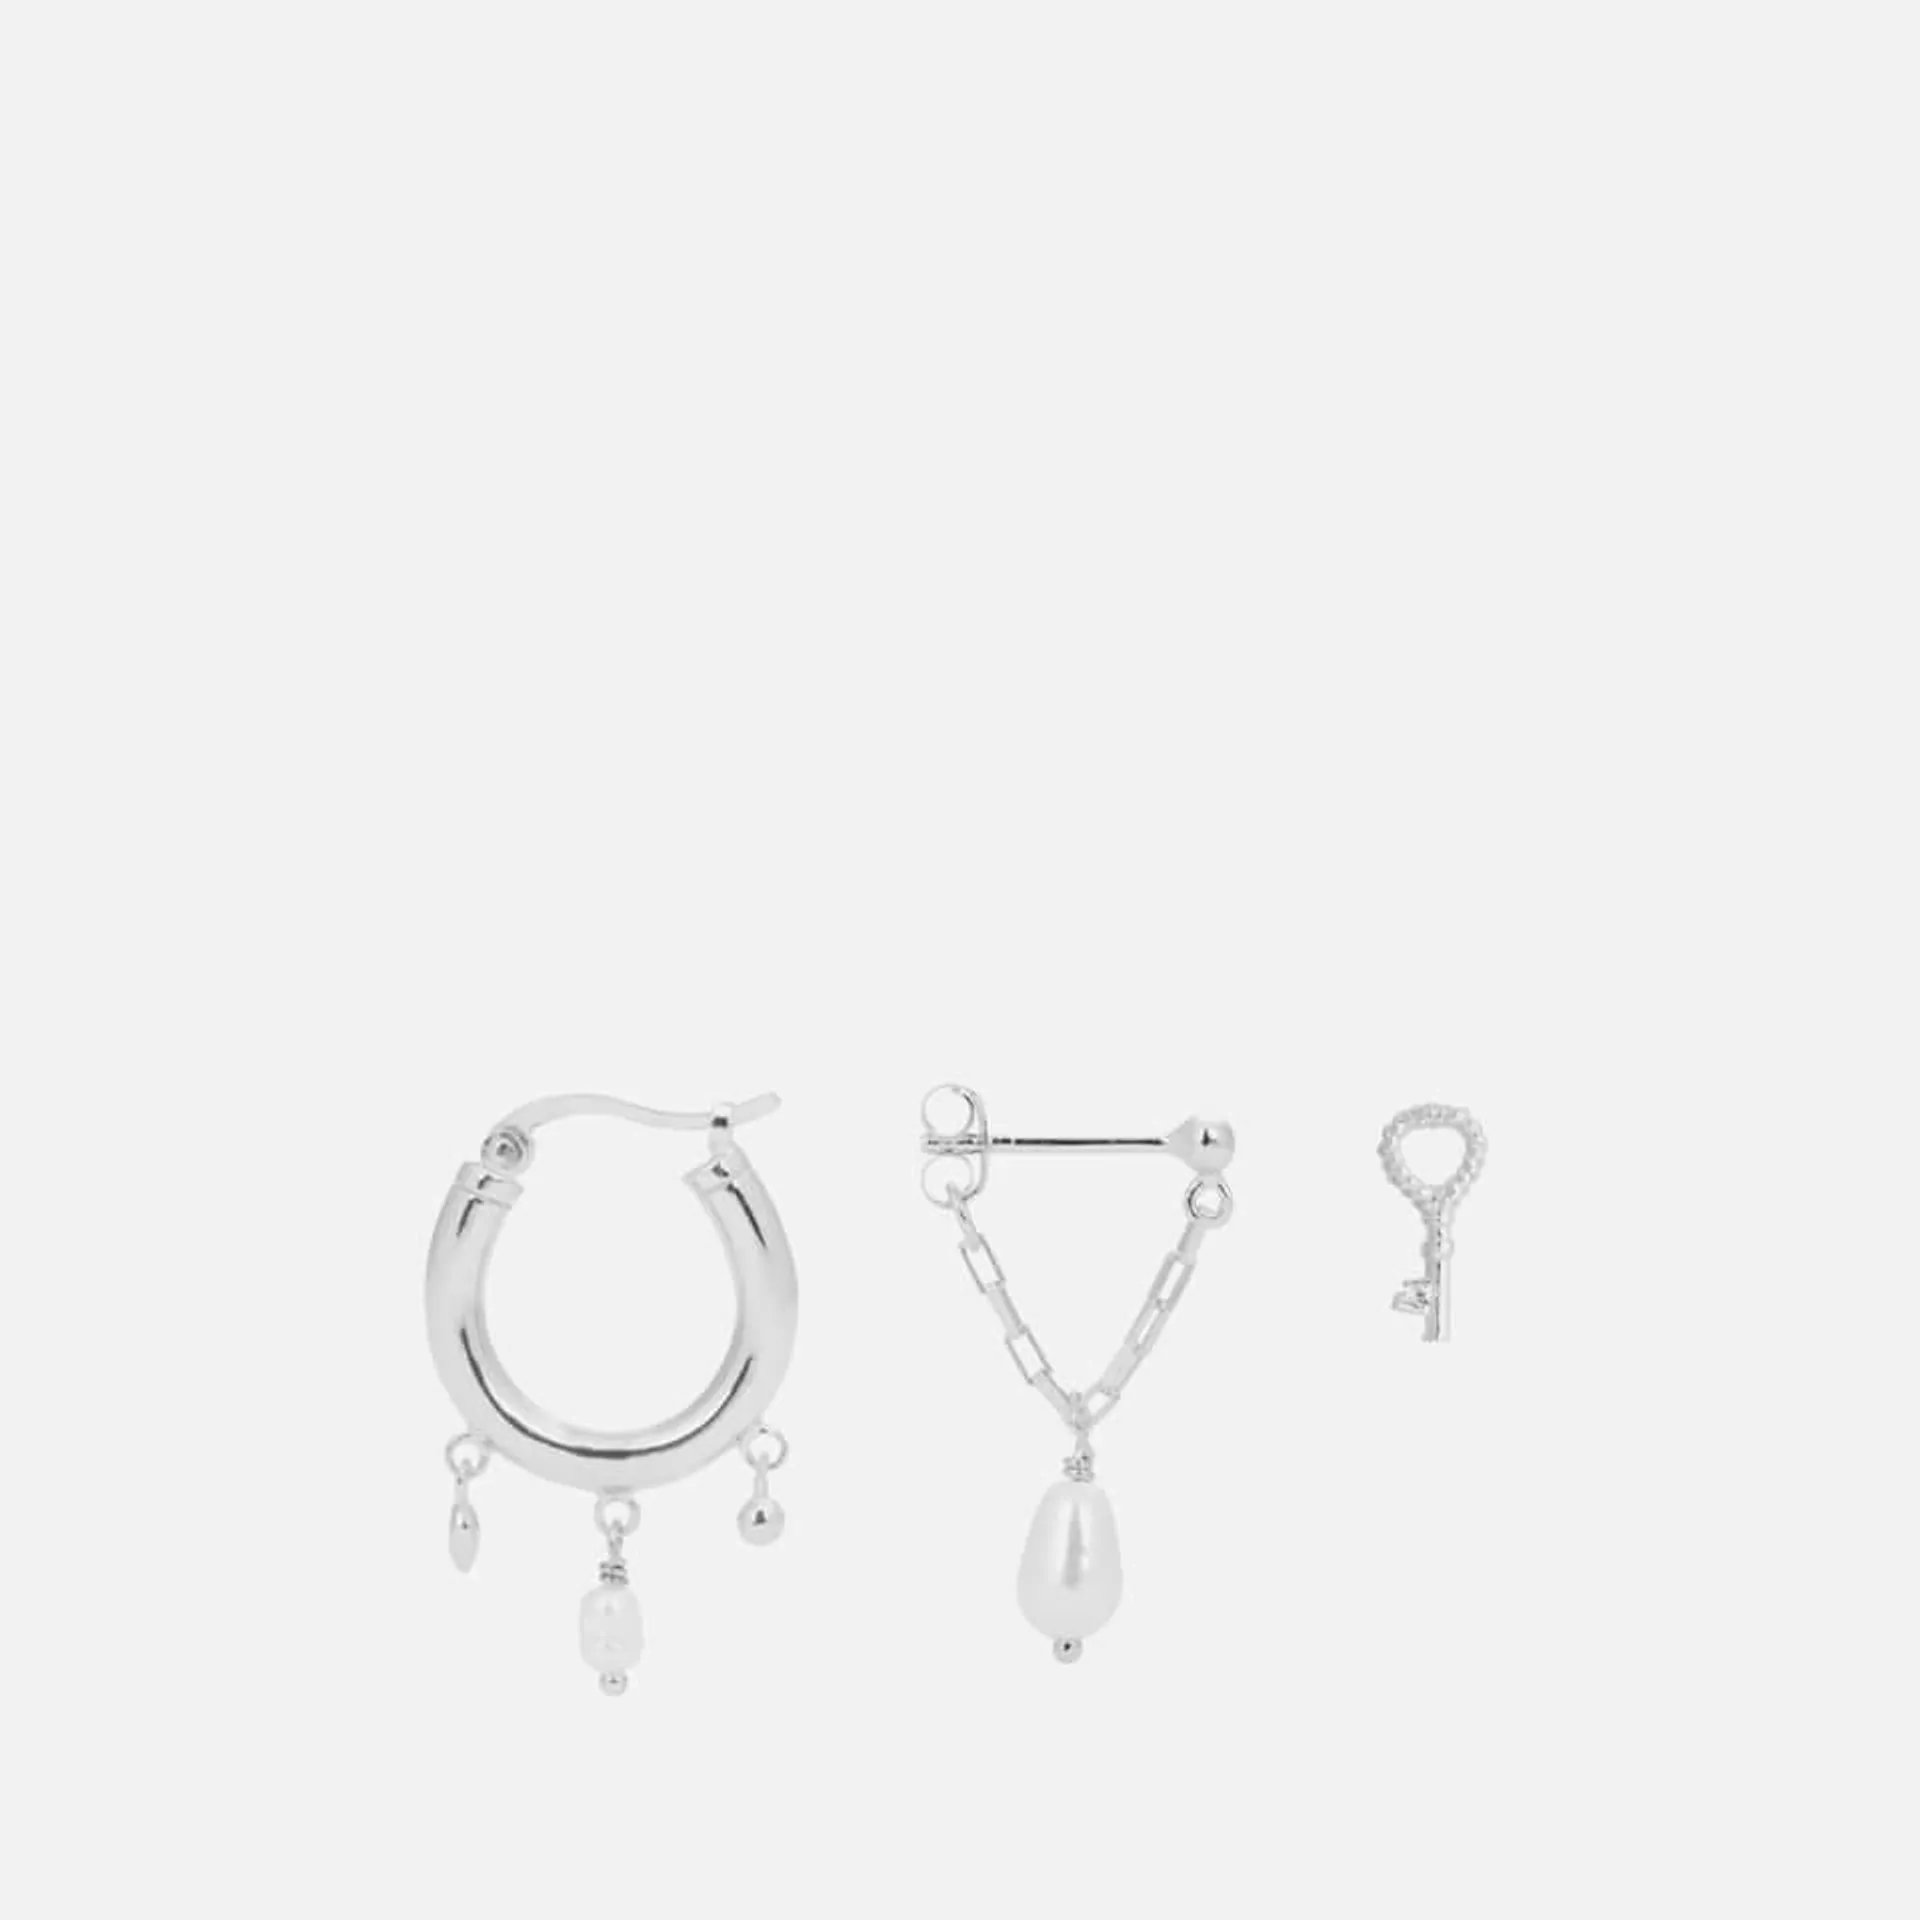 anna + nina Surreal Poetry Sterling SIlver Earring Set